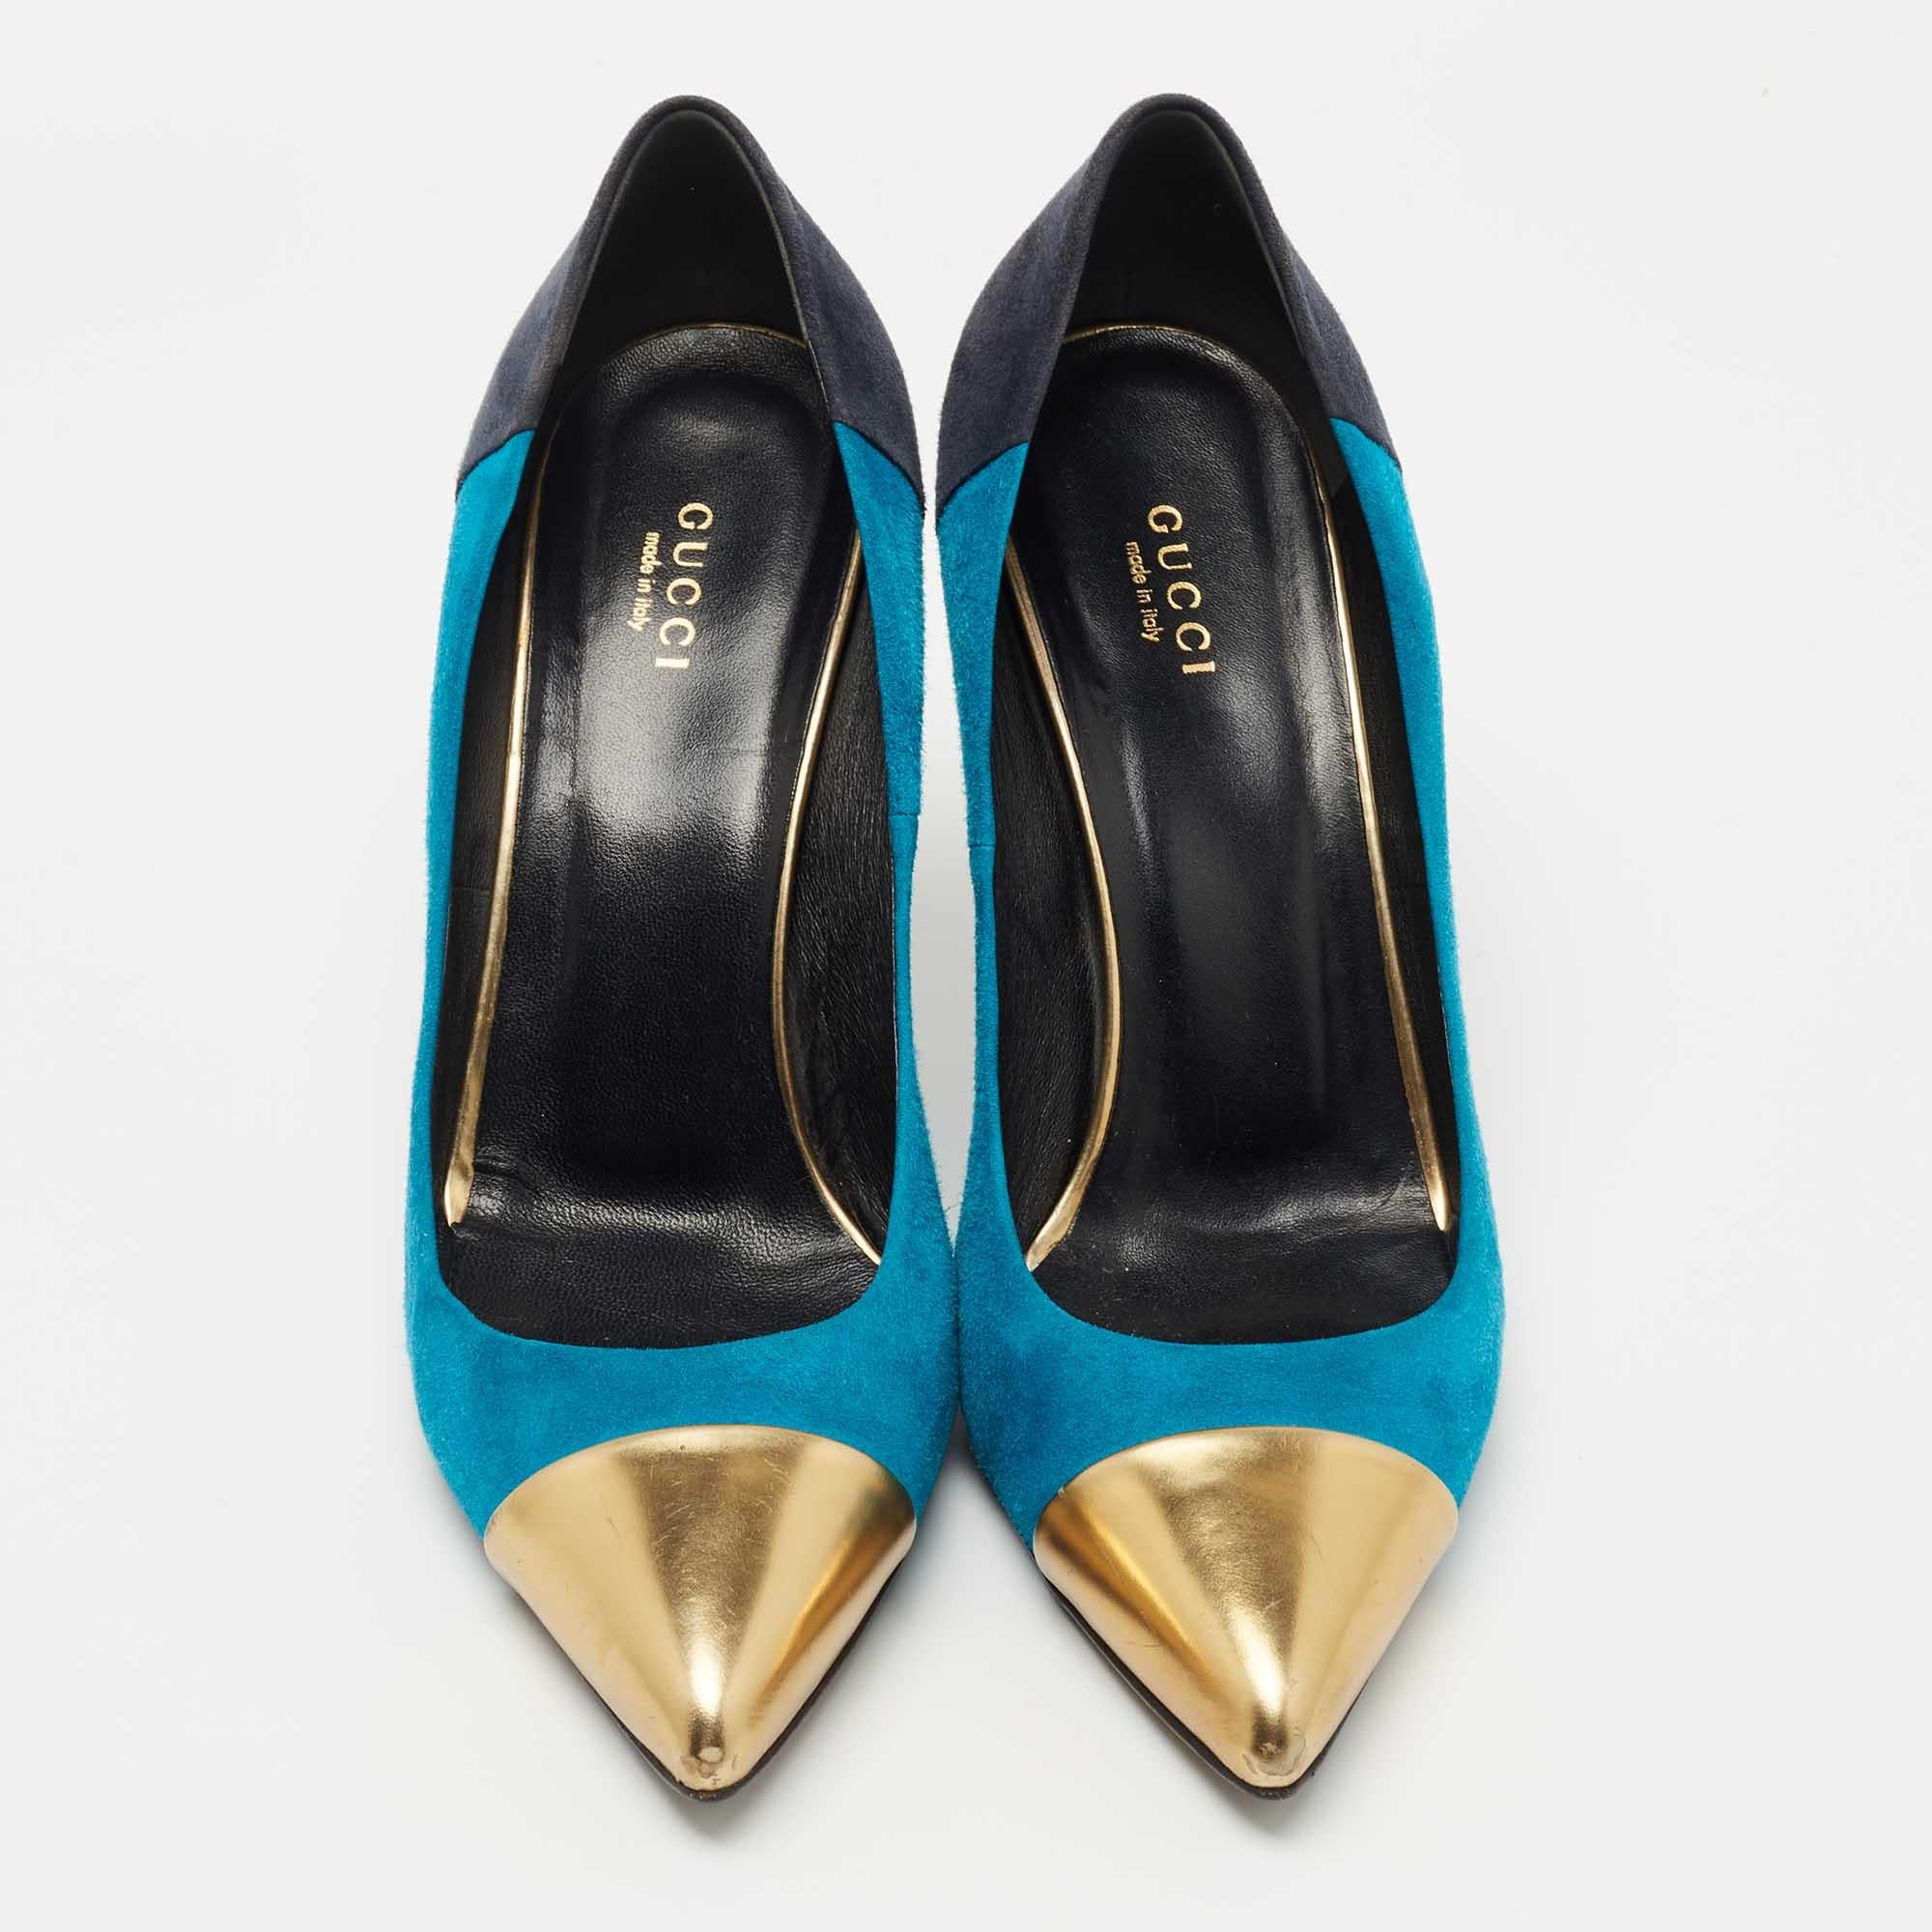 Gucci Tricolor Suede and Leather Pointed Cap Toe Pumps Size 40 For Sale 2